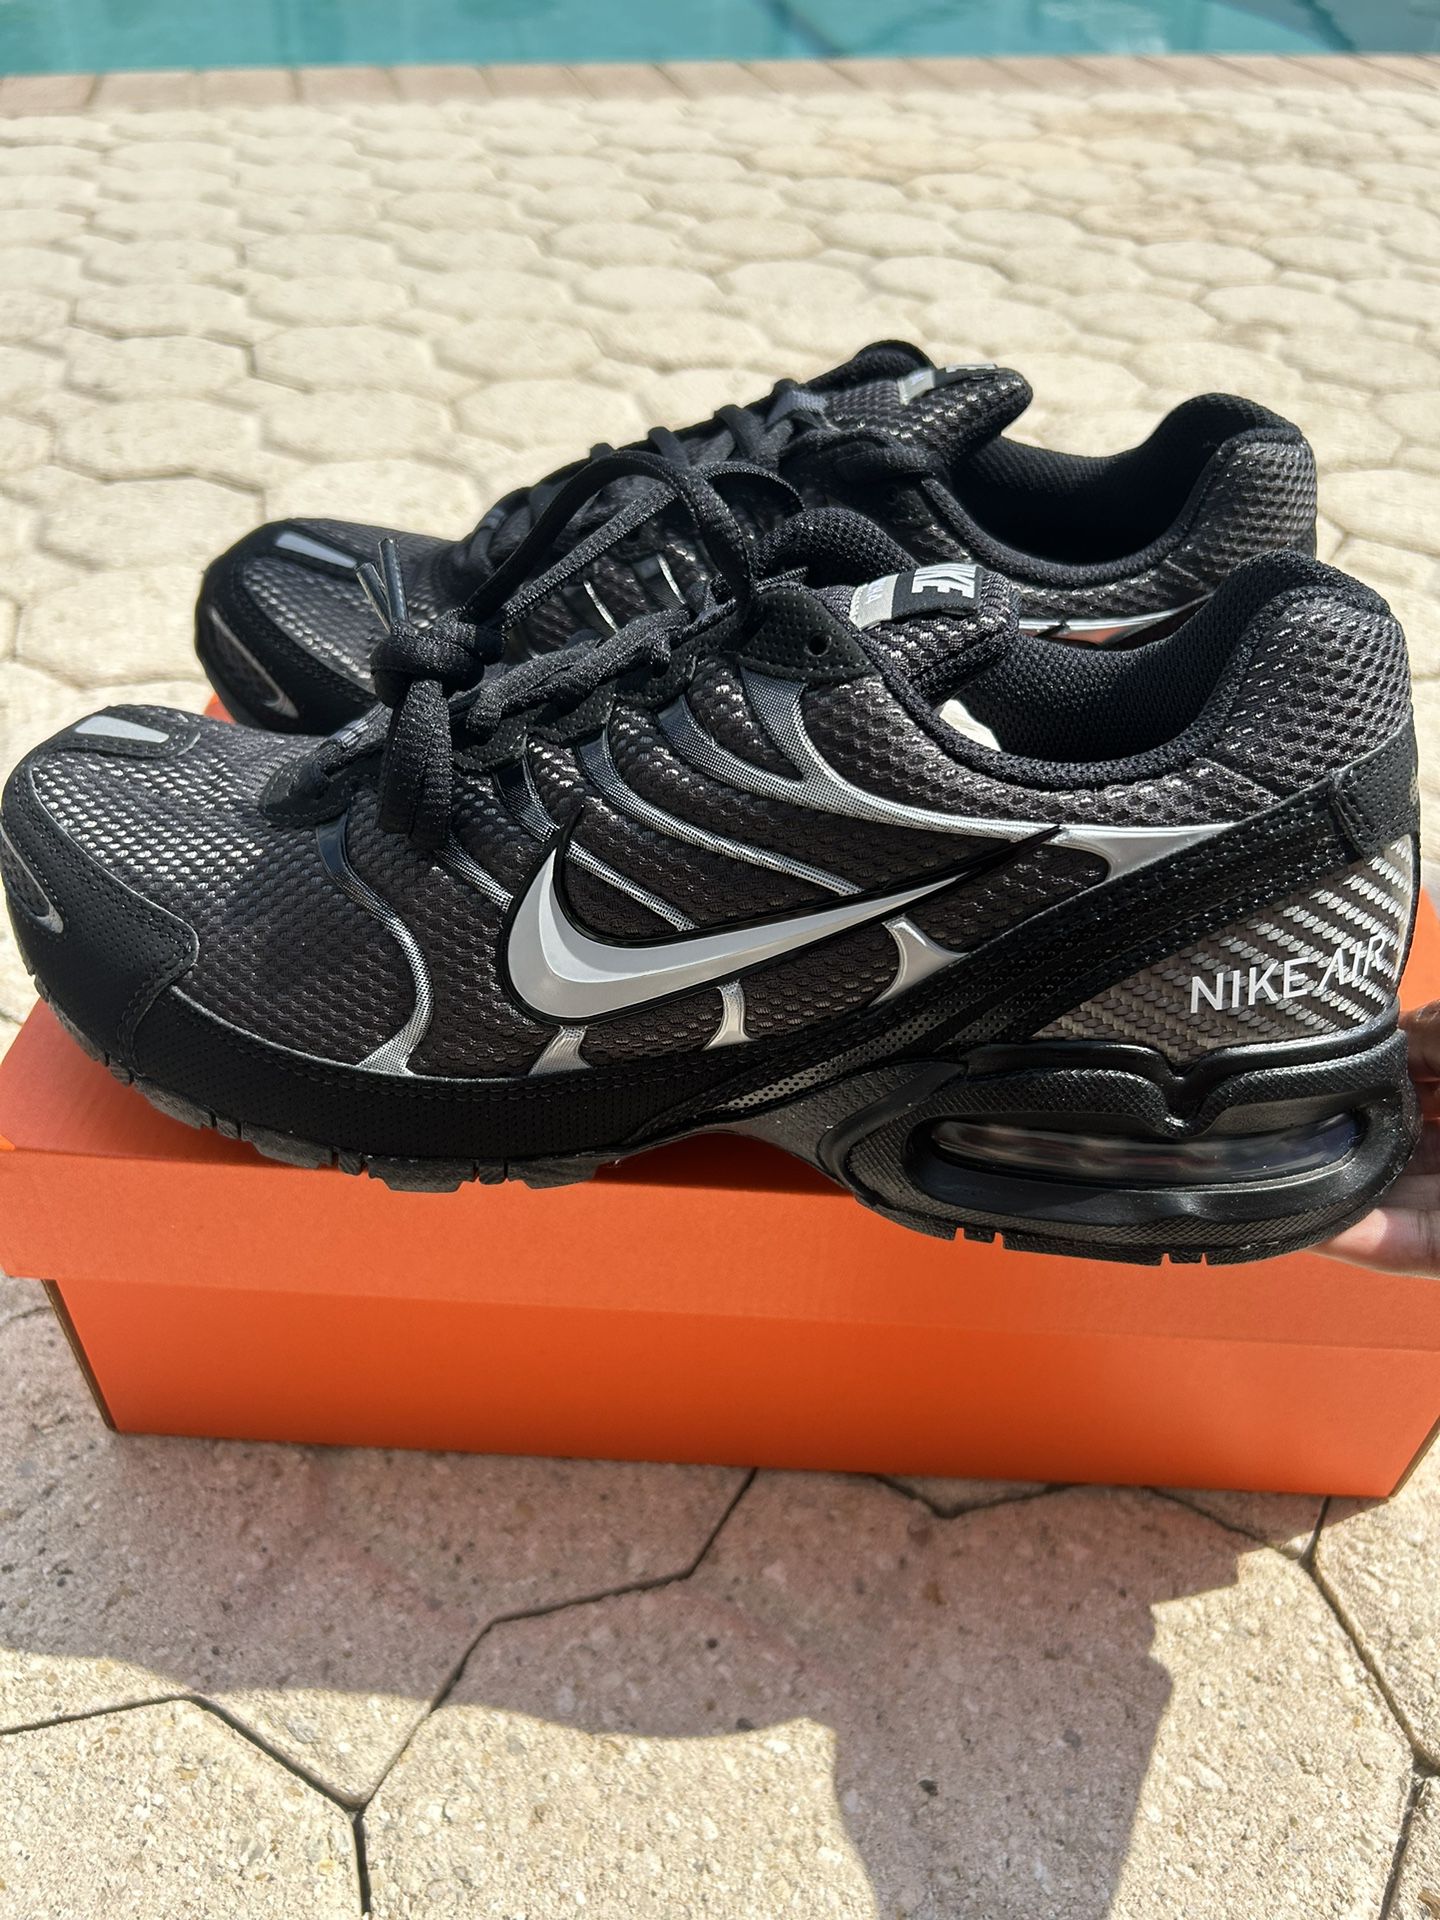 Nike Air Max Torch Size 9M-12M AVAILABLE….$95‼️Steal Price‼️